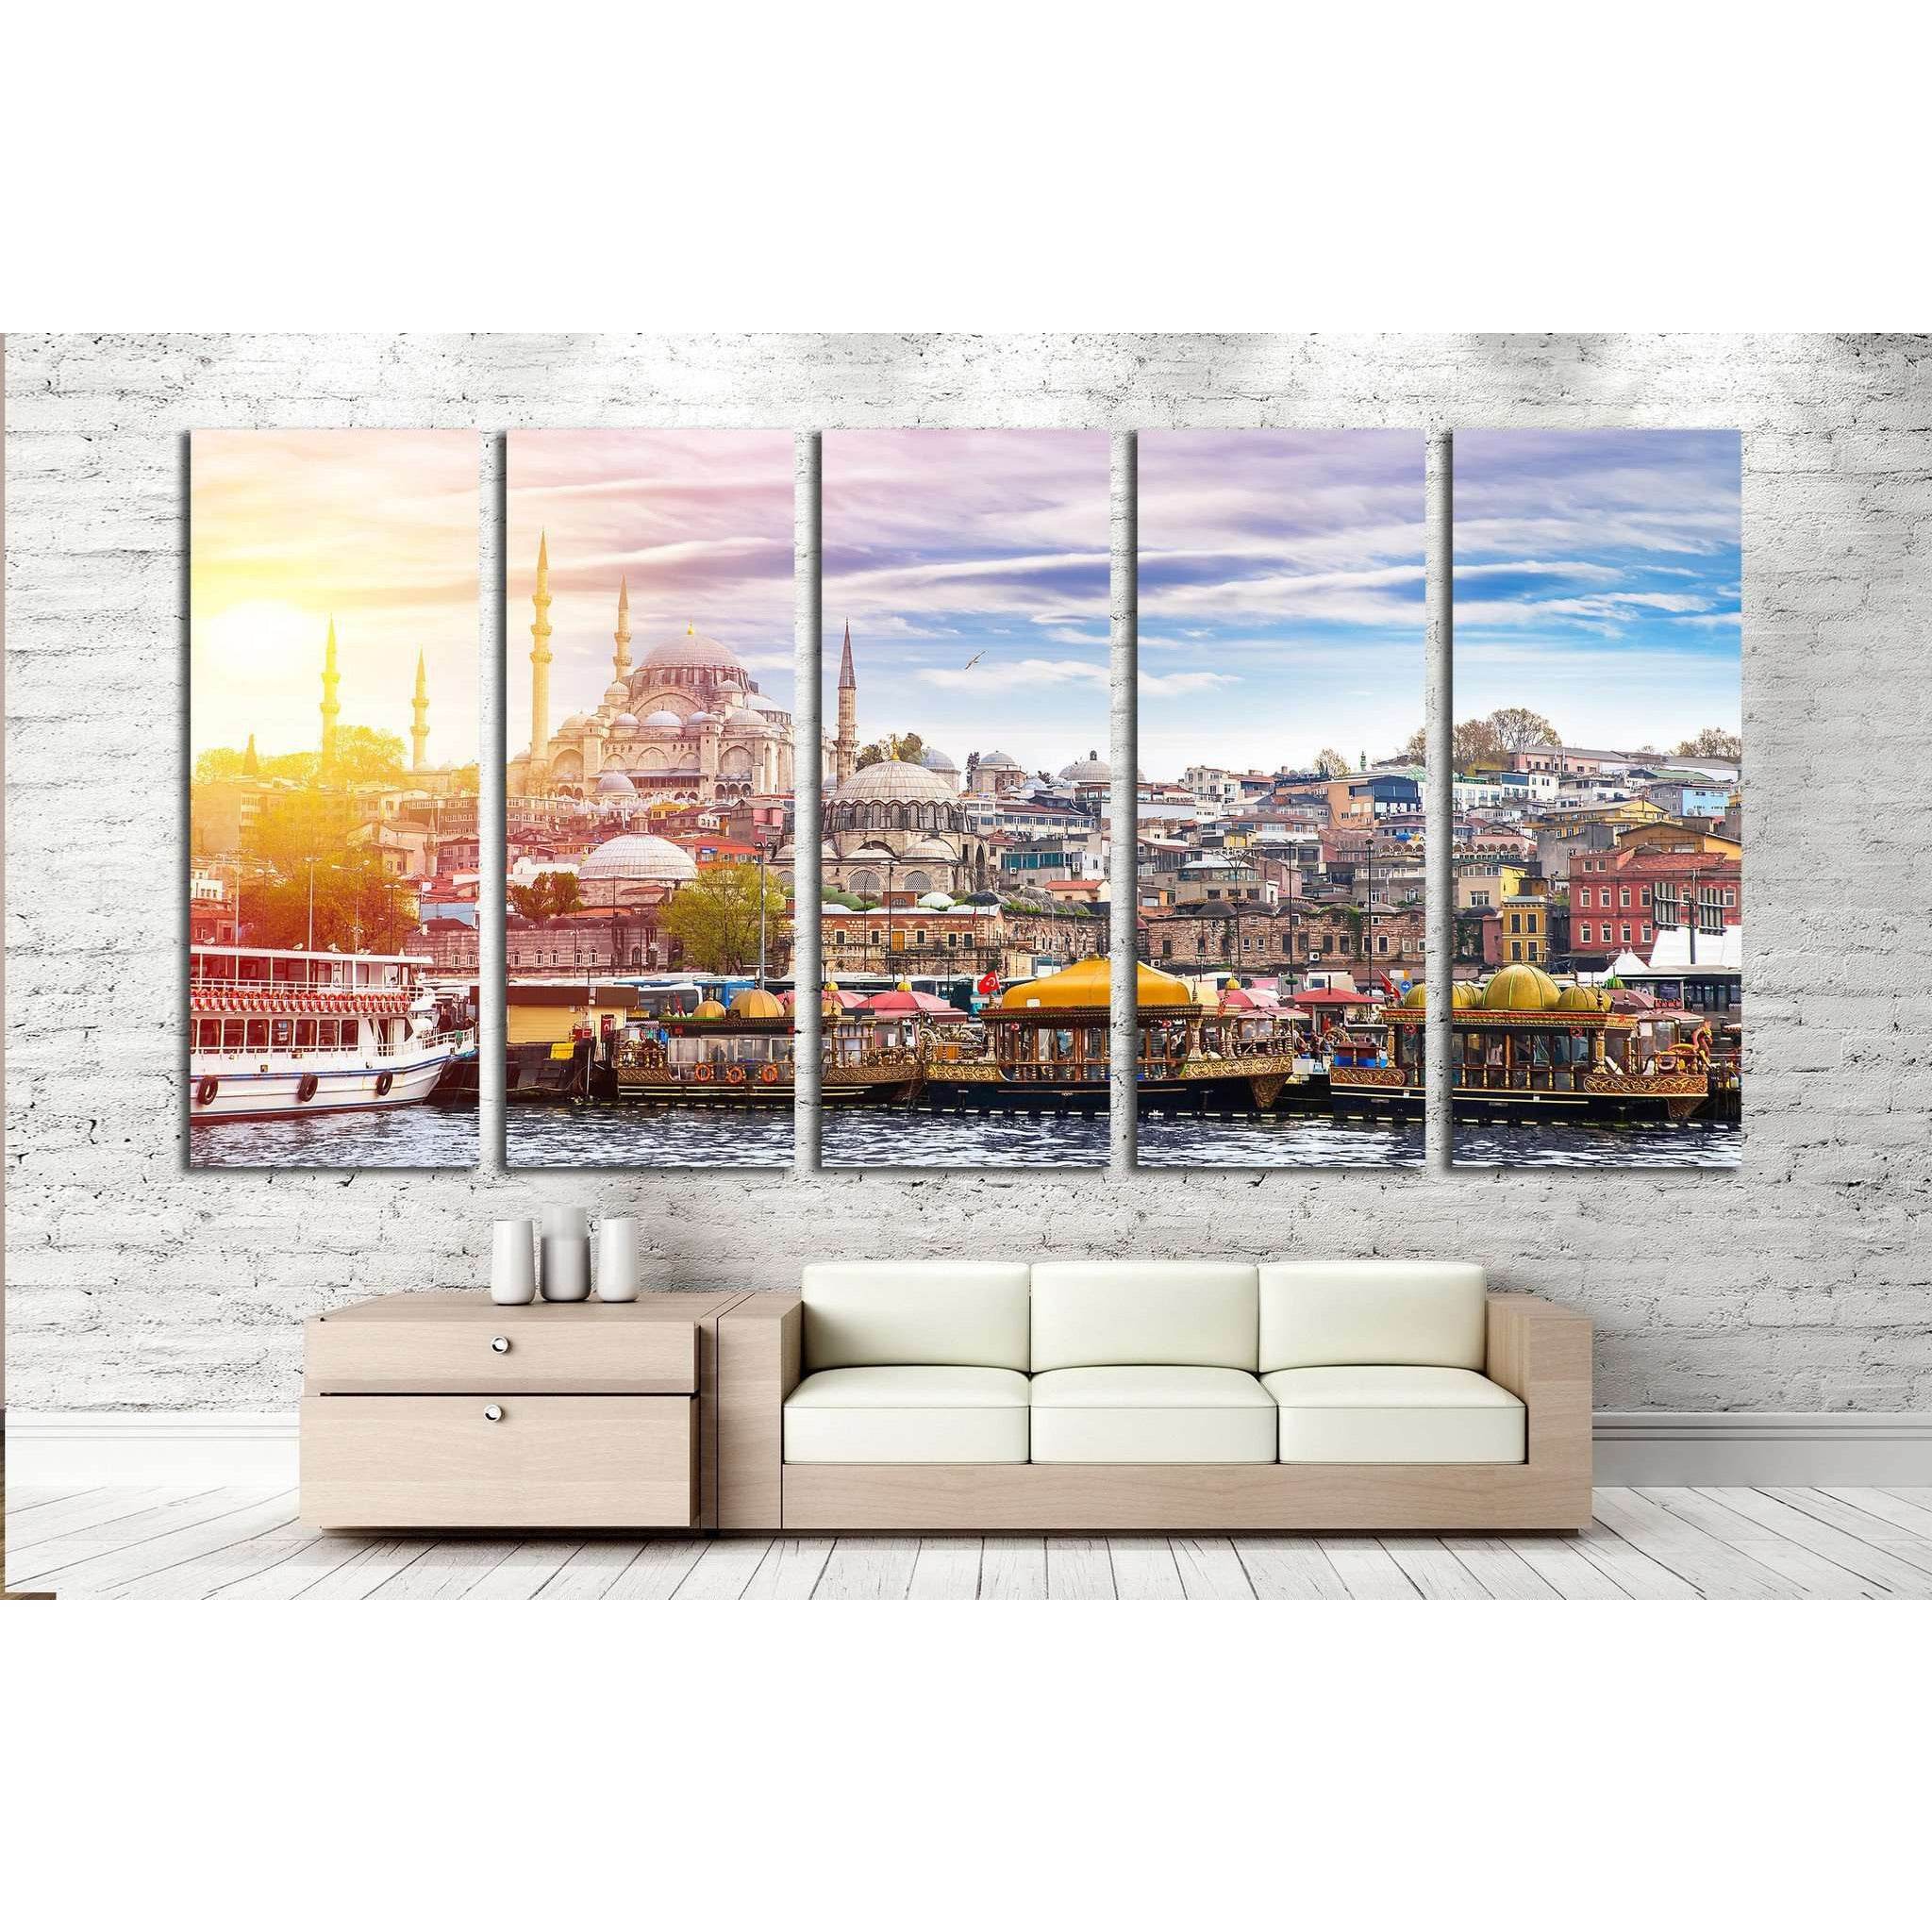 Istanbul, Turkey, Eastern Tourist City №1179 Ready to Hang Canvas Print